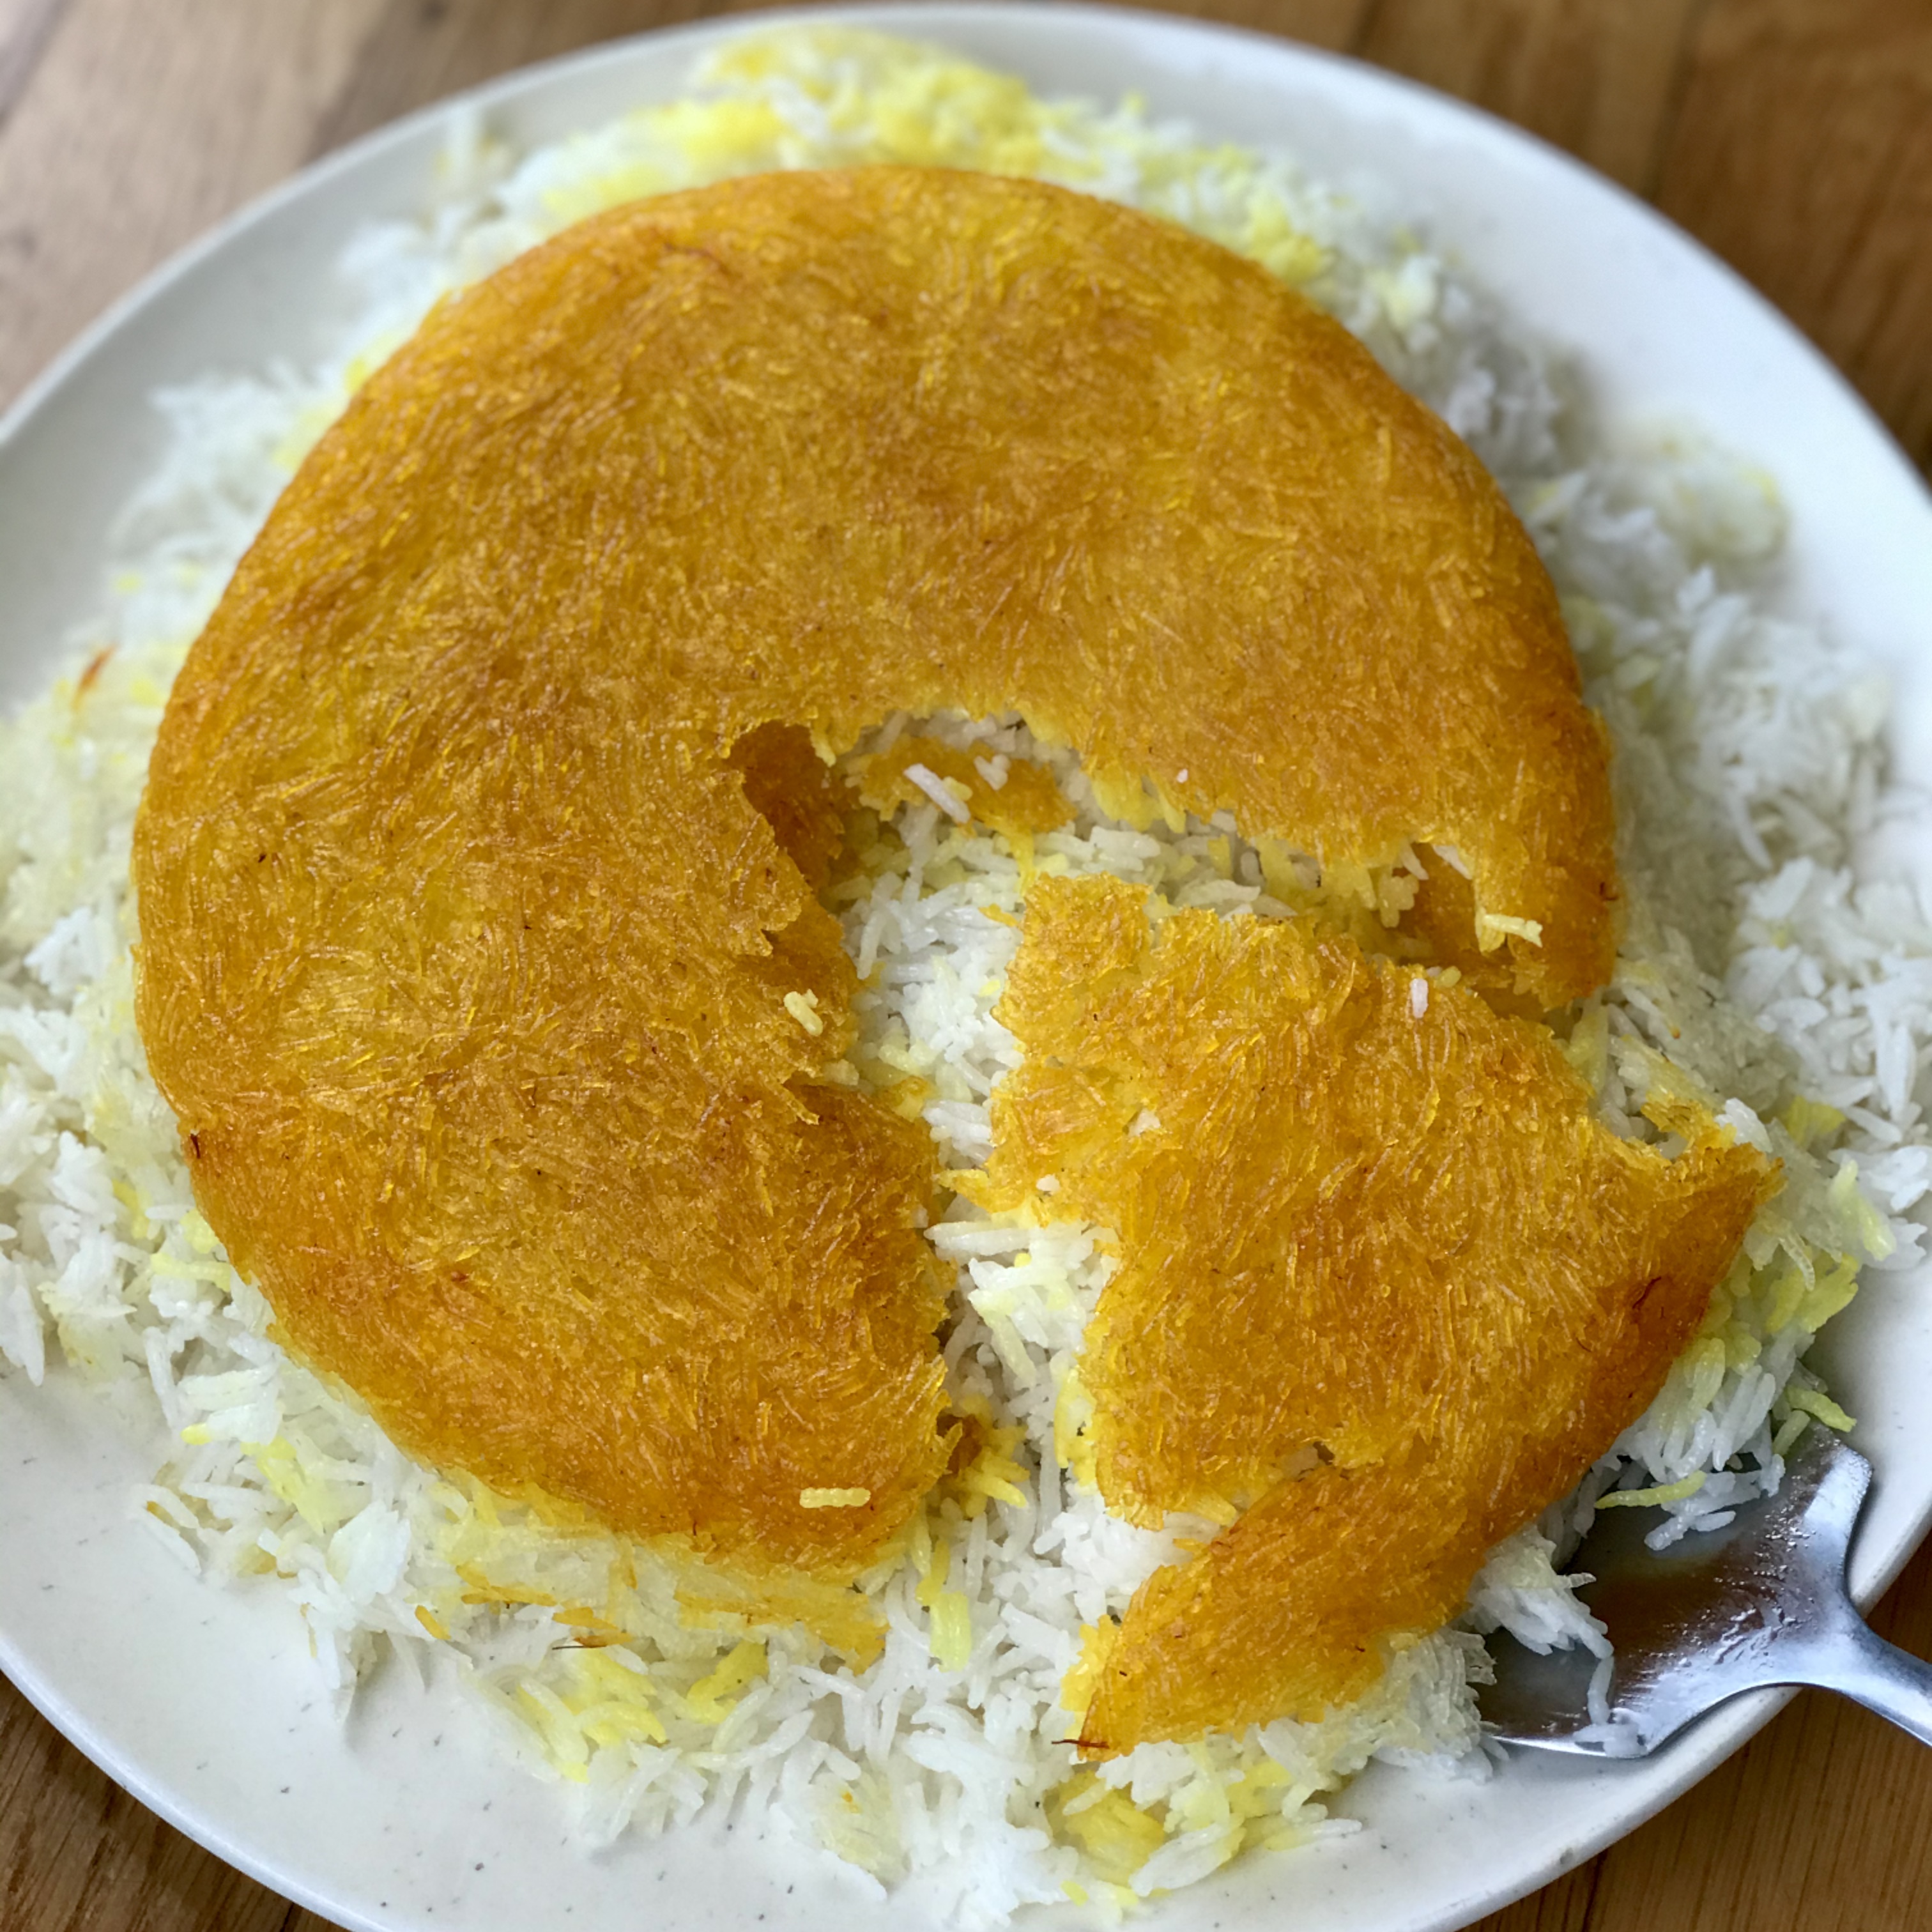 Persian Rice Cooking Method with Rice Cooker